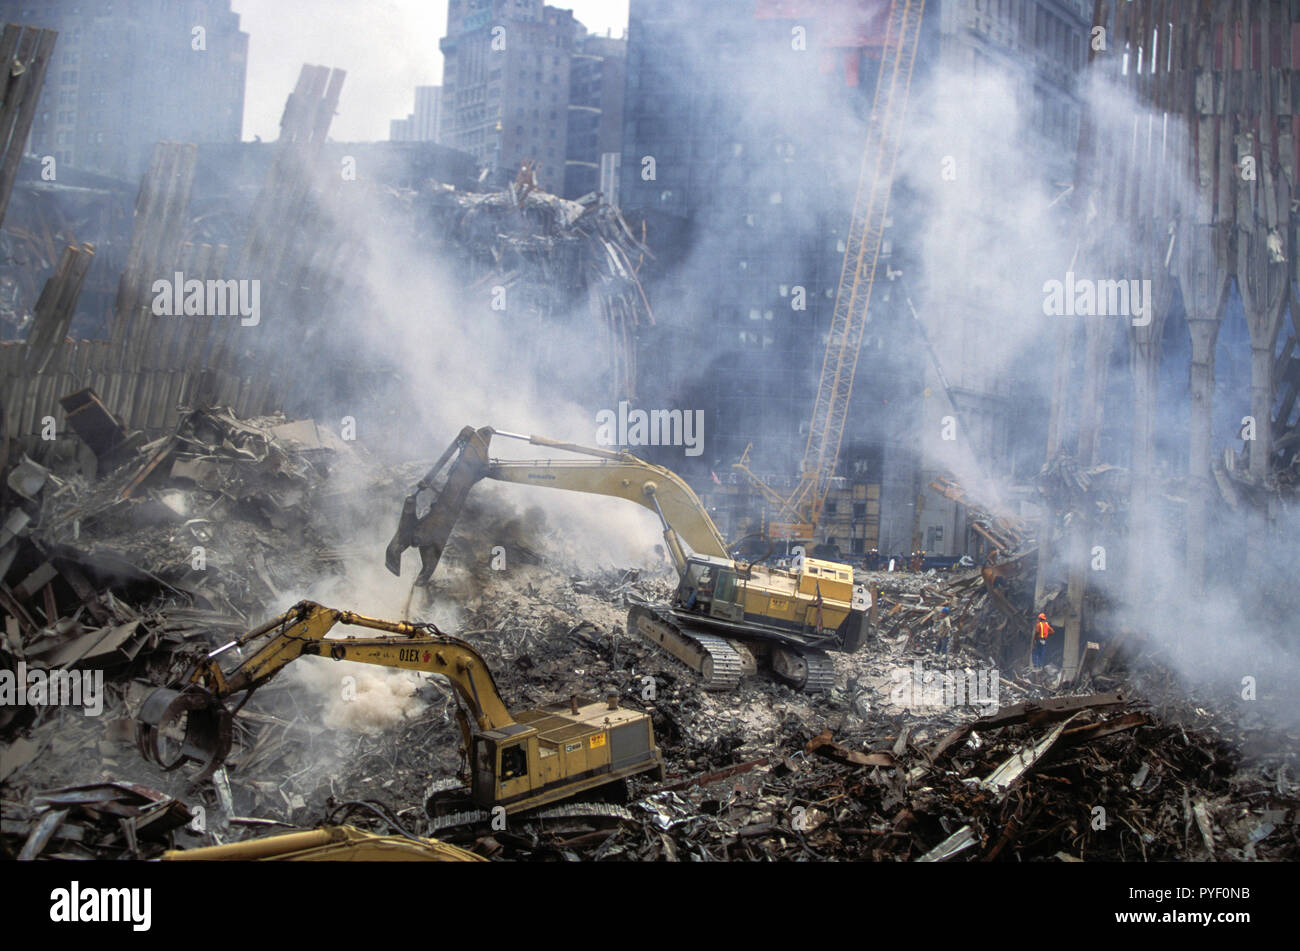 Sep 24, 2001 - Ground Zero, following the 9-11 Terrorist Attacks at the World Trade Center. Photo by Gary Ell Stock Photo